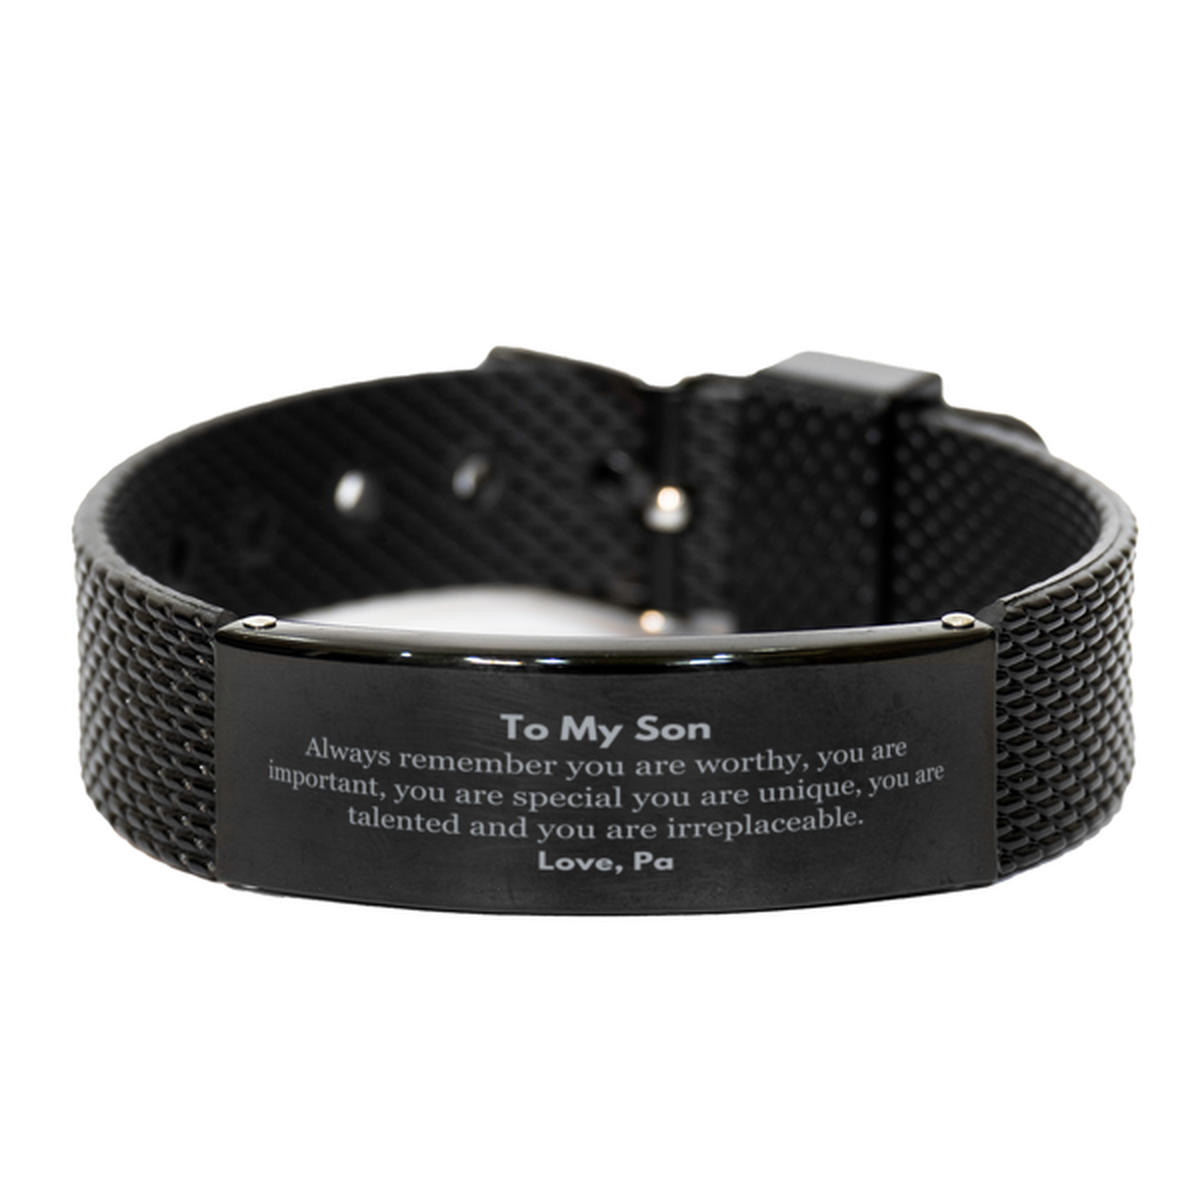 Son Birthday Gifts from Pa, Inspirational Black Shark Mesh Bracelet for Son Christmas Graduation Gifts for Son Always remember you are worthy, you are important. Love, Pa